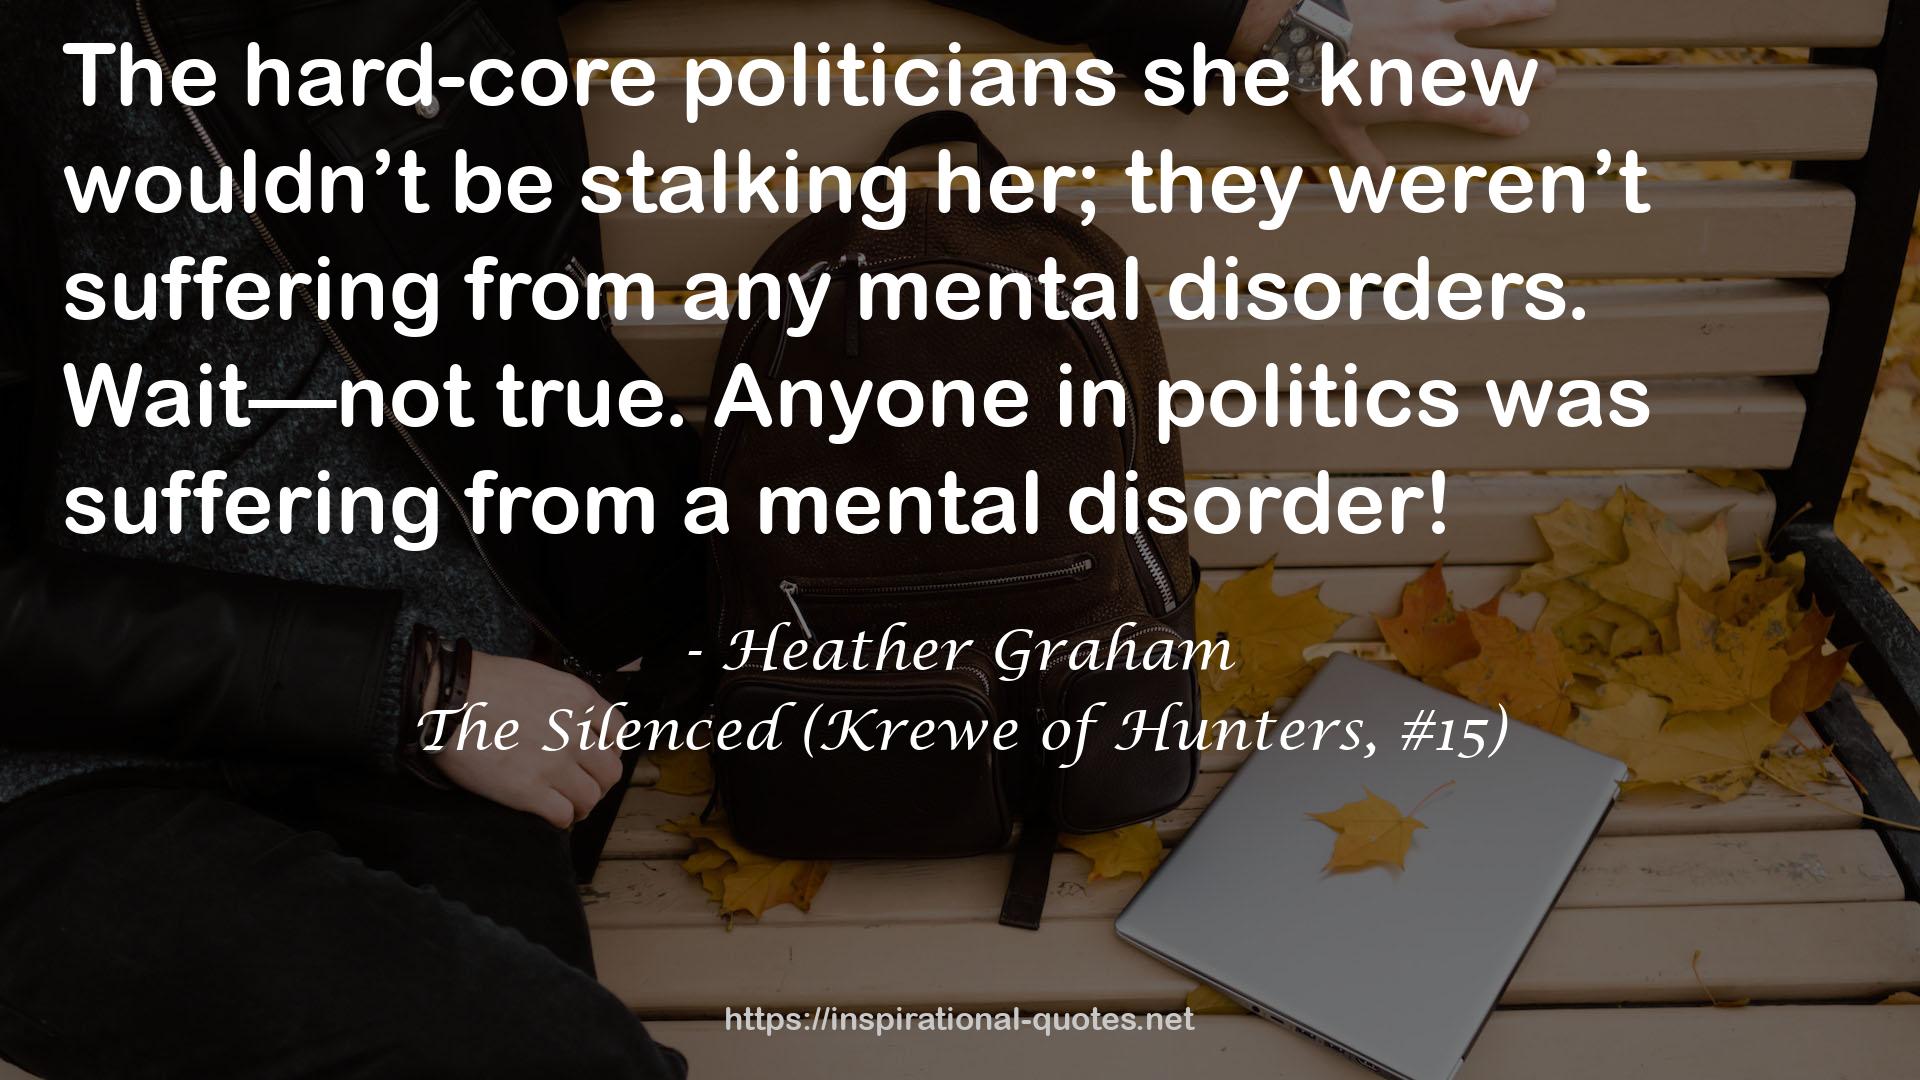 The Silenced (Krewe of Hunters, #15) QUOTES